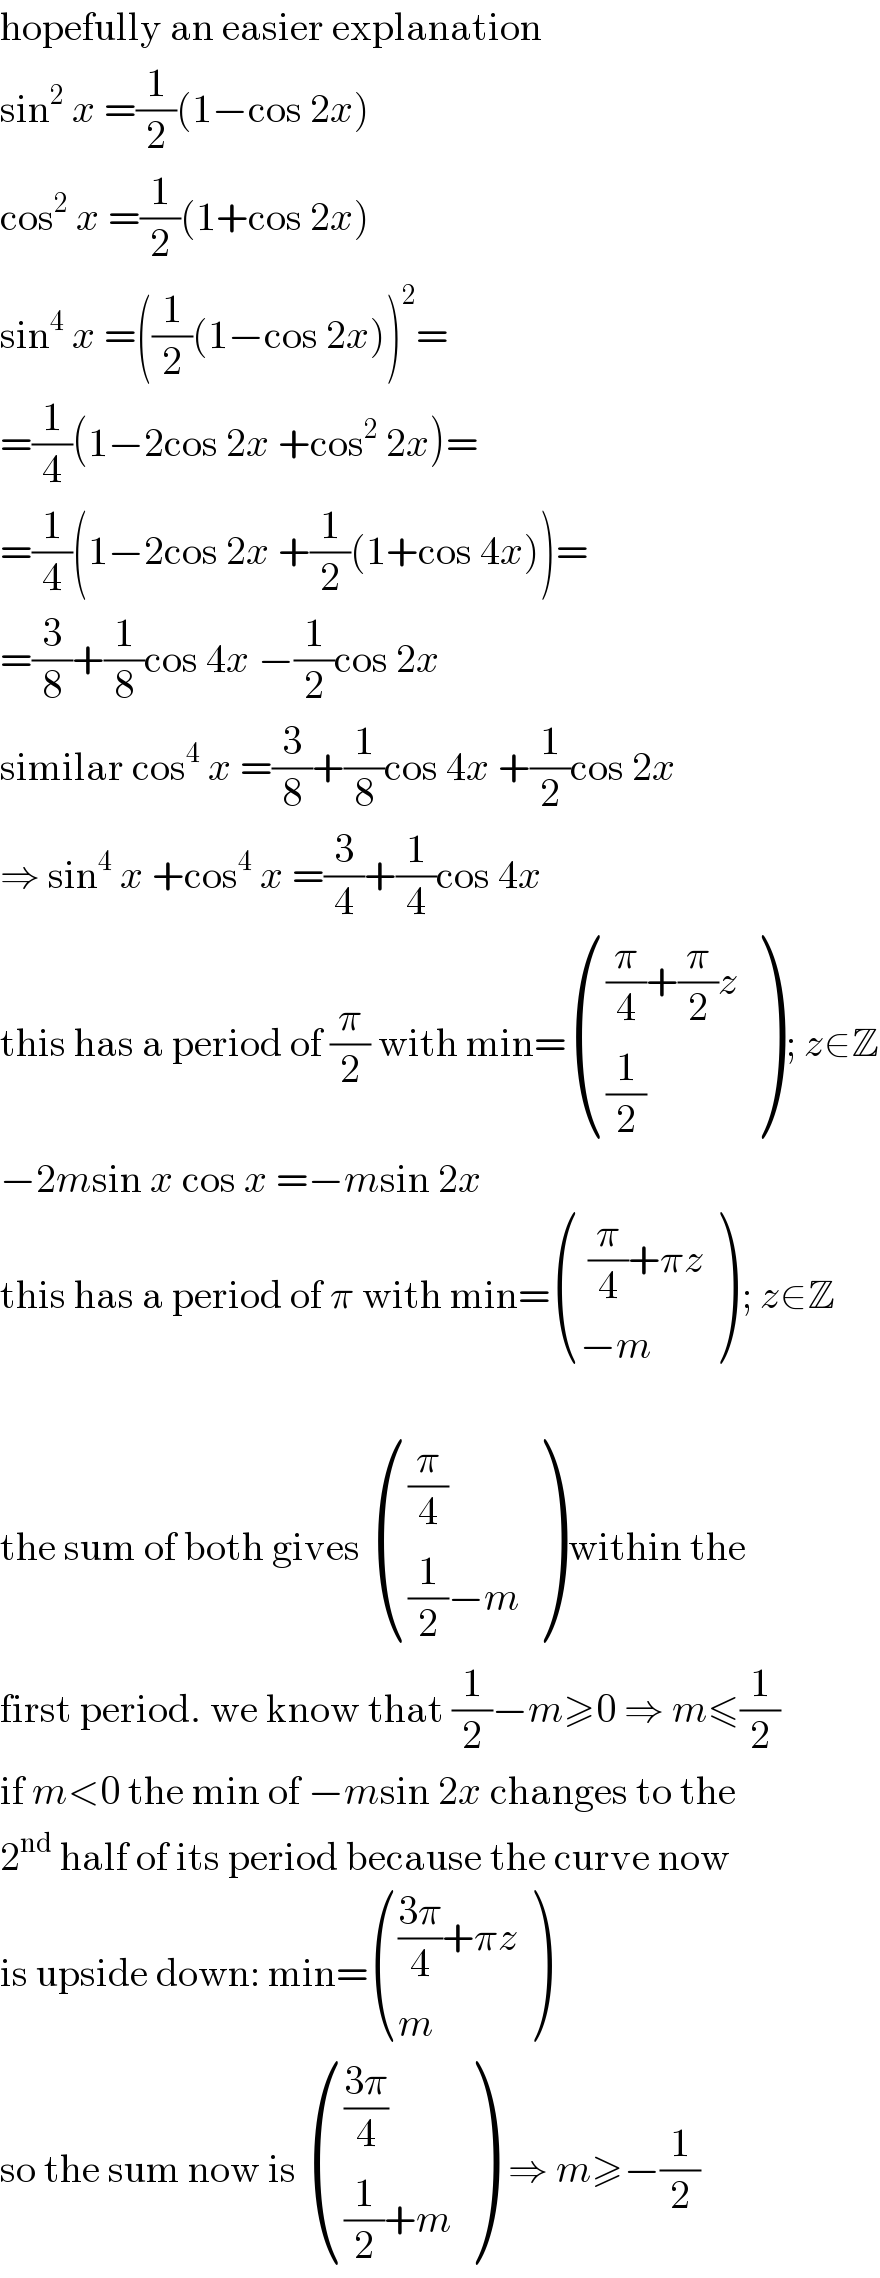 hopefully an easier explanation  sin^2  x =(1/2)(1−cos 2x)  cos^2  x =(1/2)(1+cos 2x)  sin^4  x =((1/2)(1−cos 2x))^2 =  =(1/4)(1−2cos 2x +cos^2  2x)=  =(1/4)(1−2cos 2x +(1/2)(1+cos 4x))=  =(3/8)+(1/8)cos 4x −(1/2)cos 2x  similar cos^4  x =(3/8)+(1/8)cos 4x +(1/2)cos 2x  ⇒ sin^4  x +cos^4  x =(3/4)+(1/4)cos 4x  this has a period of (π/2) with min= ((((π/4)+(π/2)z)),((1/2)) ) ; z∈Z  −2msin x cos x =−msin 2x  this has a period of π with min= ((( (π/4)+πz)),((−m)) ) ; z∈Z    the sum of both gives  (((π/4)),(((1/2)−m)) ) within the  first period. we know that (1/2)−m≥0 ⇒ m≤(1/2)  if m<0 the min of −msin 2x changes to the  2^(nd)  half of its period because the curve now  is upside down: min= (((((3π)/4)+πz)),(m) )  so the sum now is  ((((3π)/4)),(((1/2)+m)) )  ⇒ m≥−(1/2)  